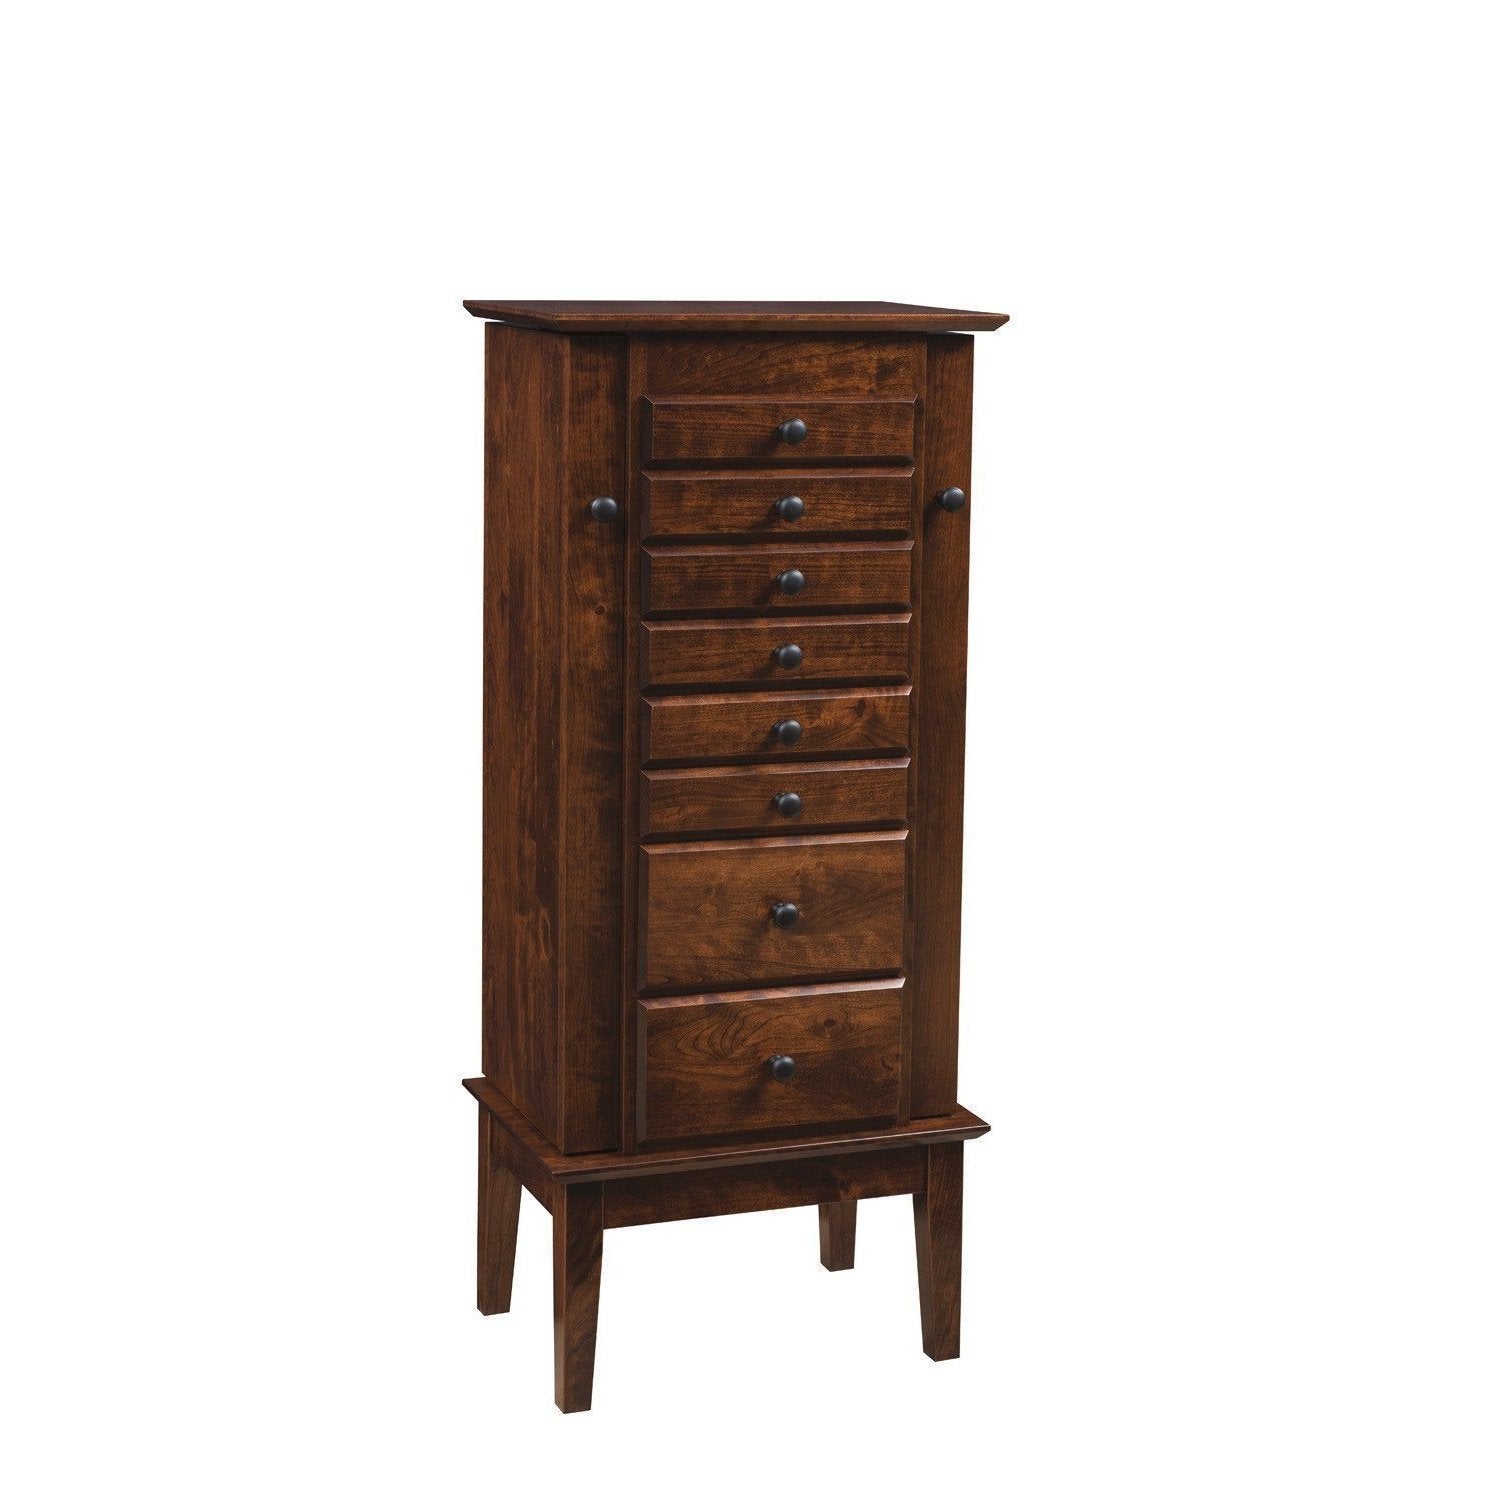 Winged Mill Shaker Jewelry Armoire